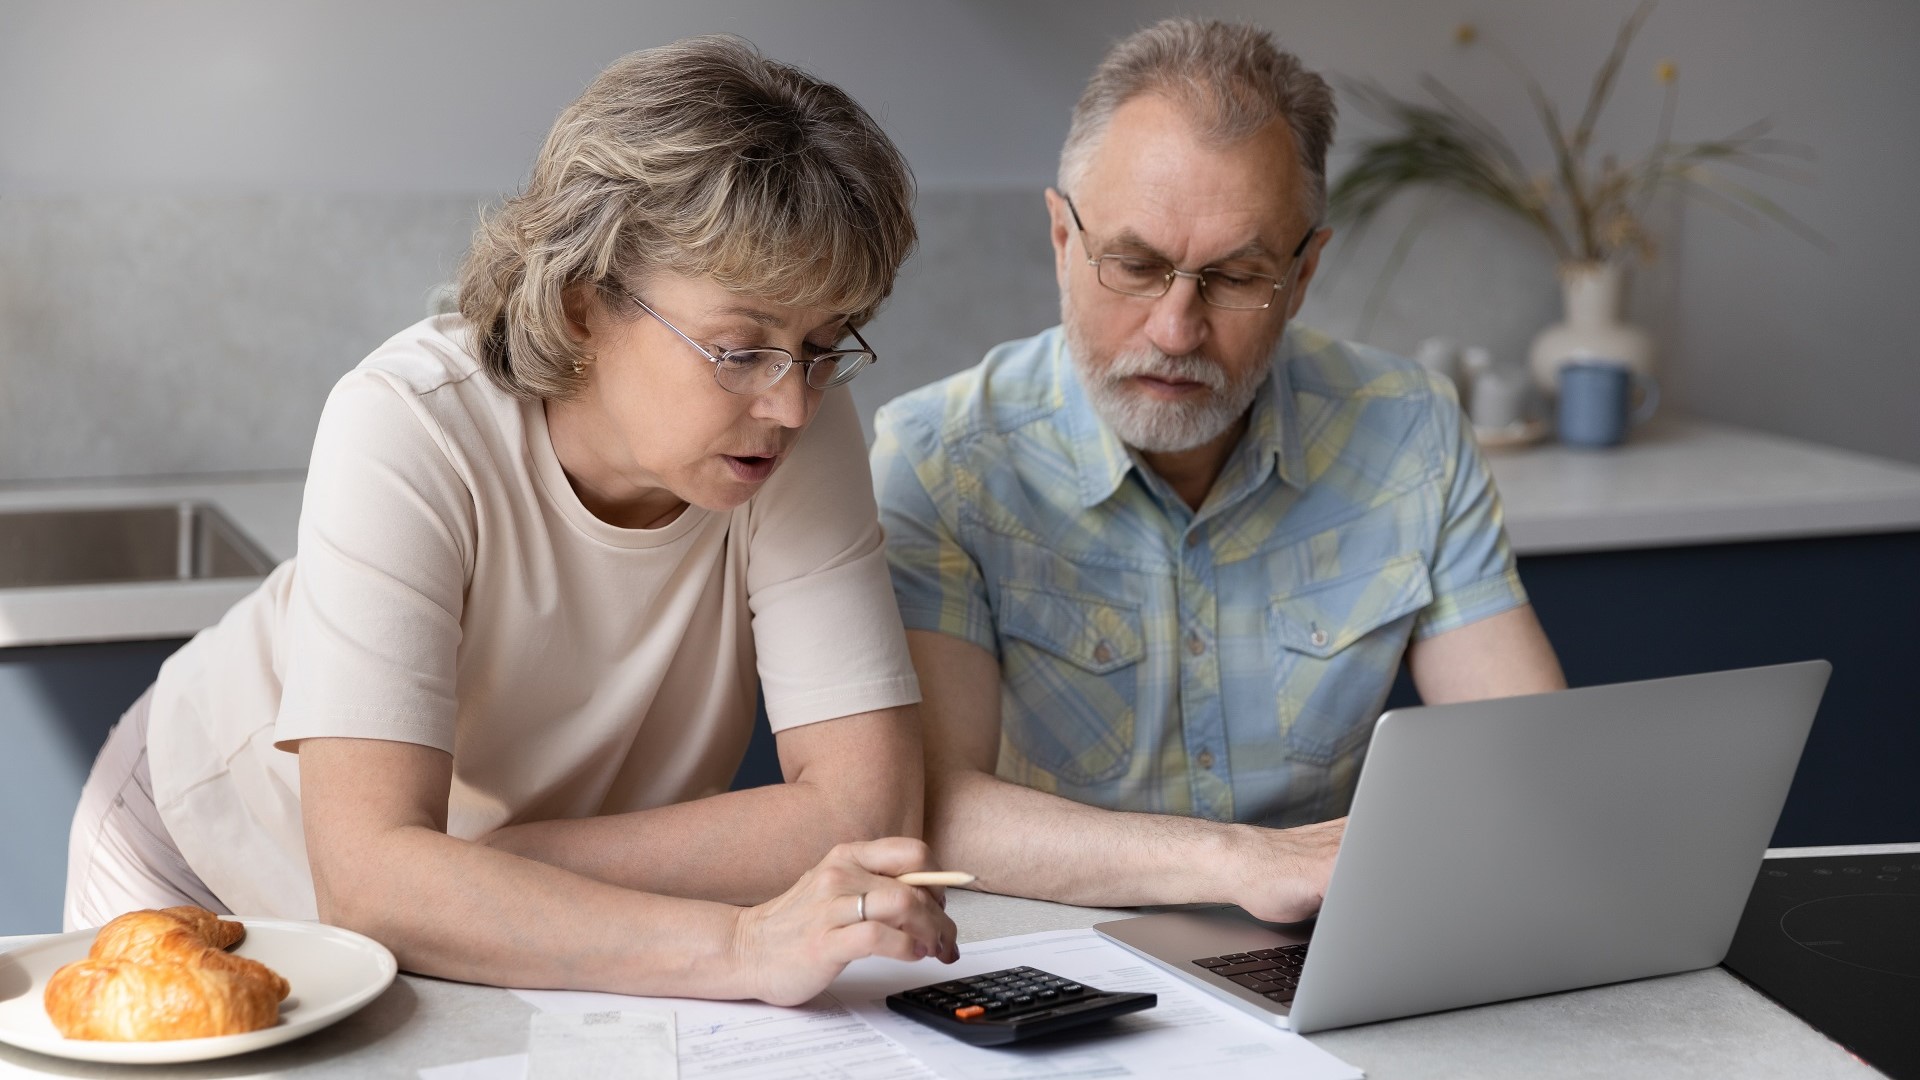 americans struggling to pay bills — gen x and boomers are struggling the most